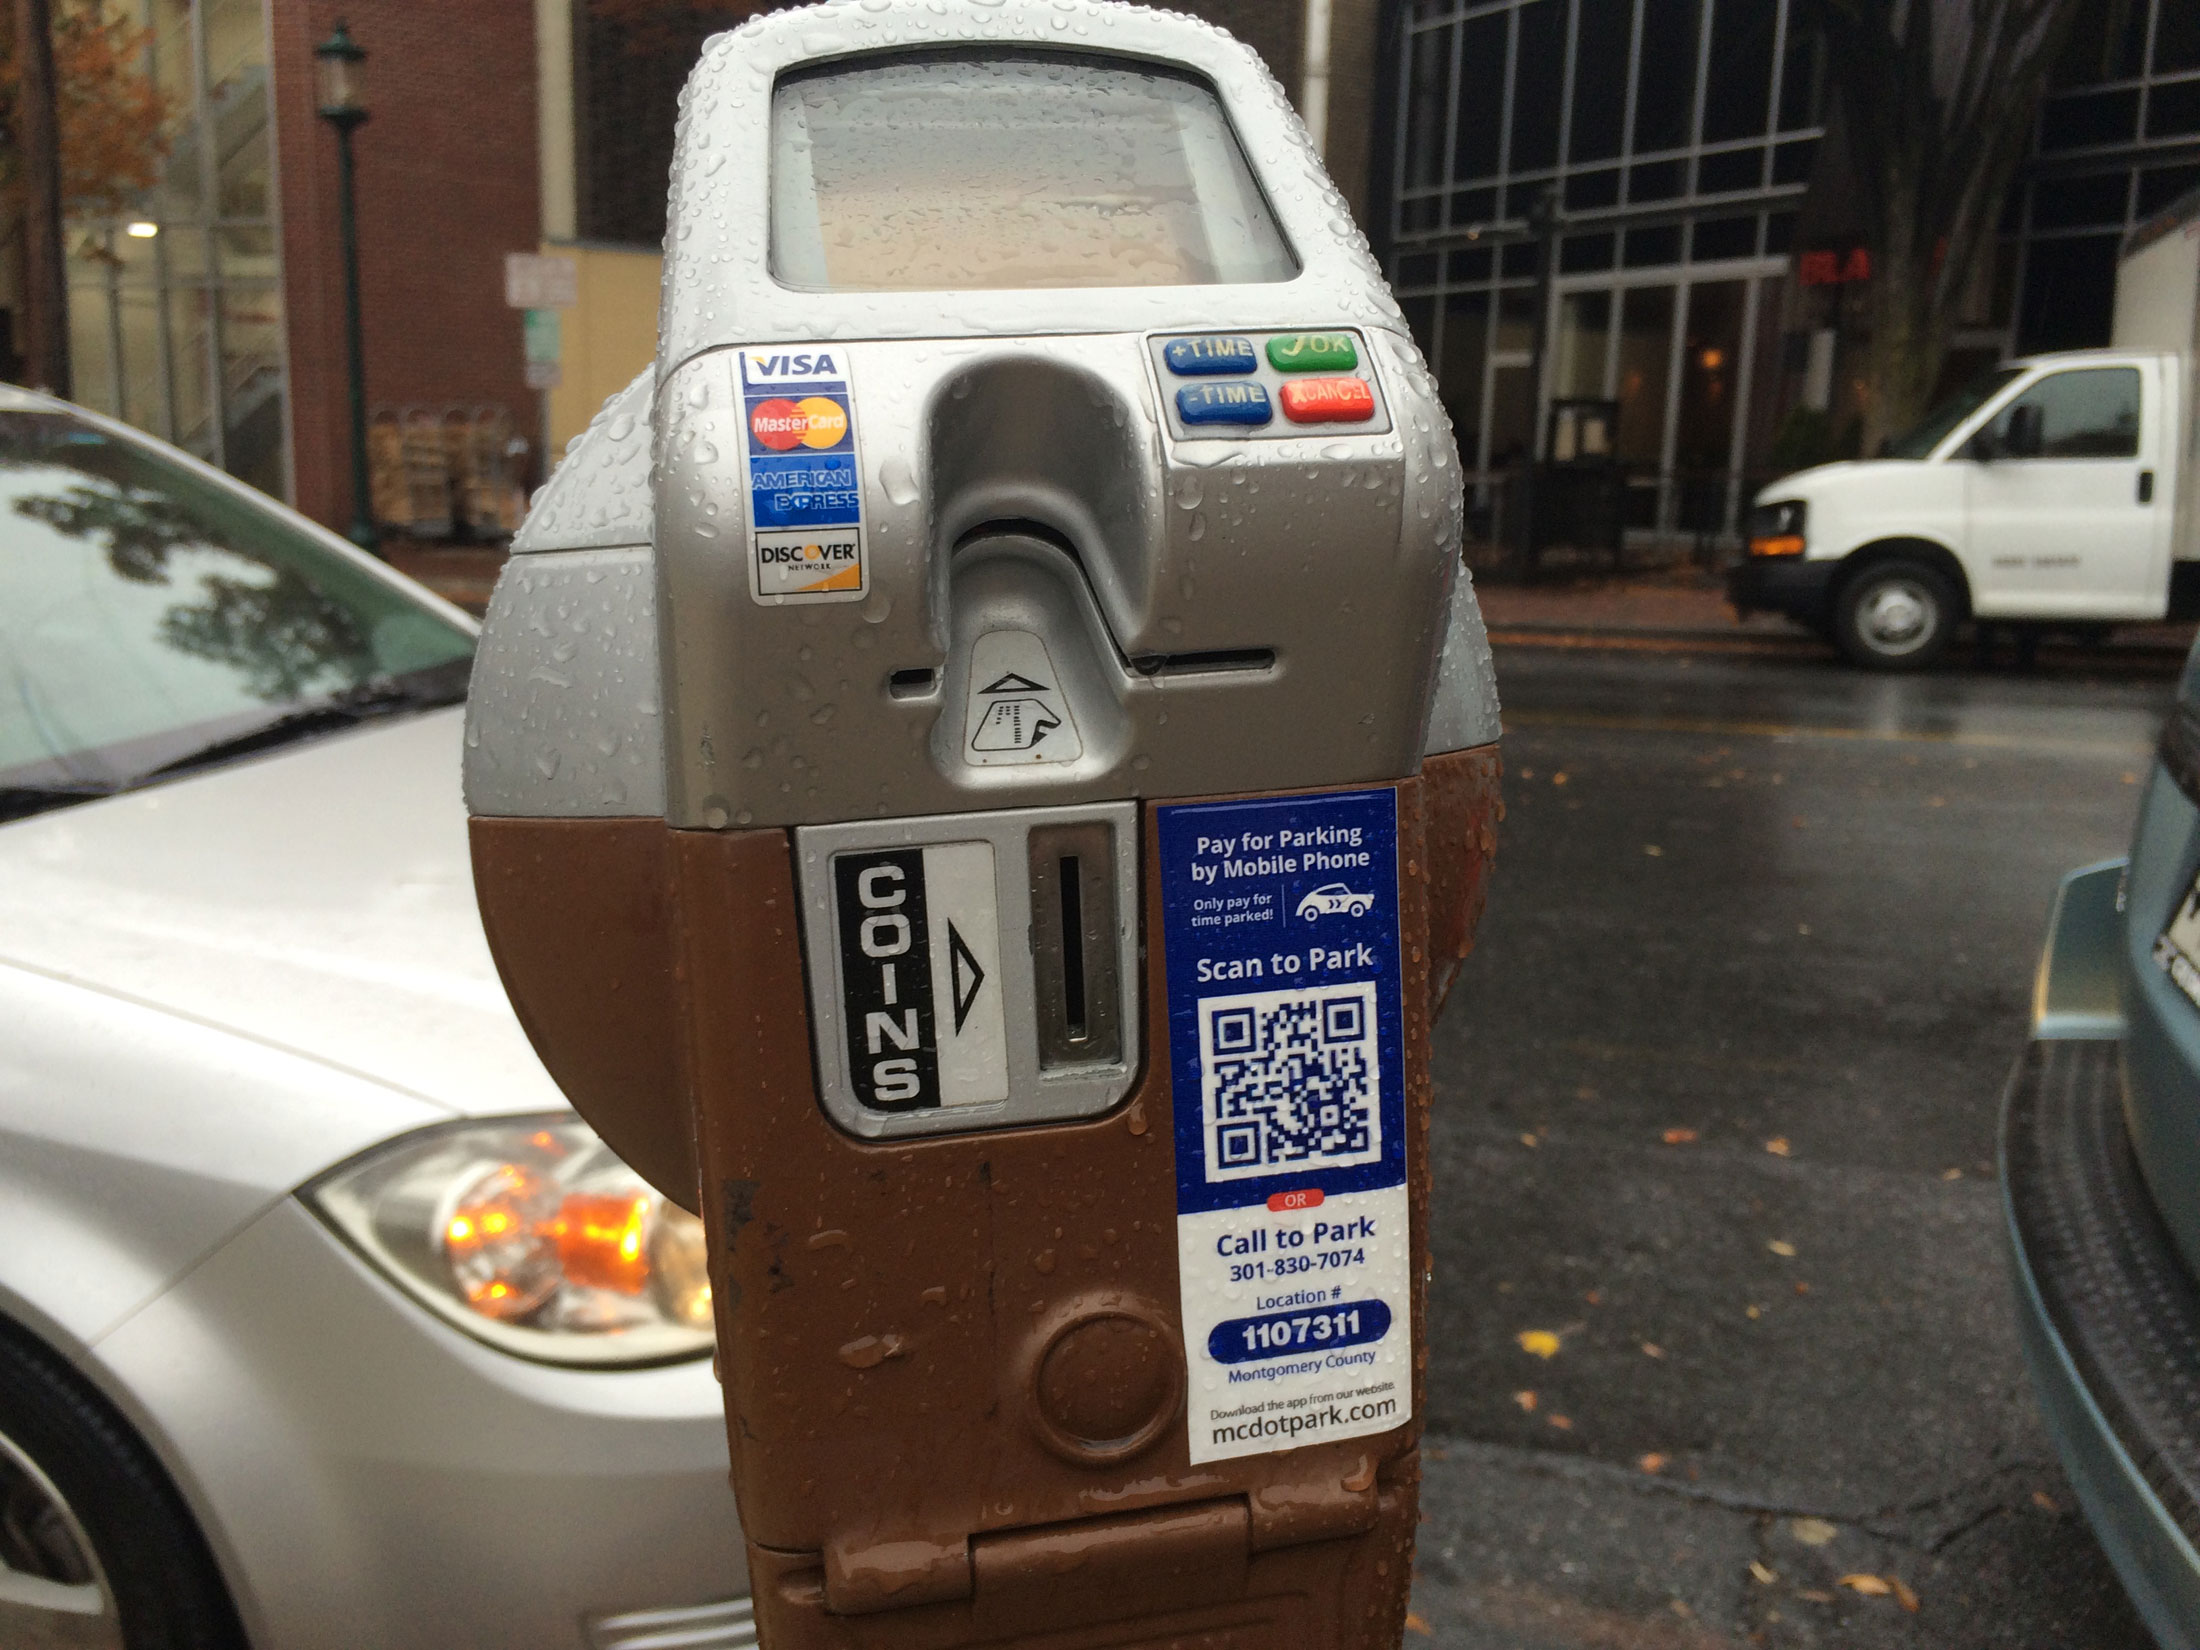 More payment options offered for Montgomery County parking